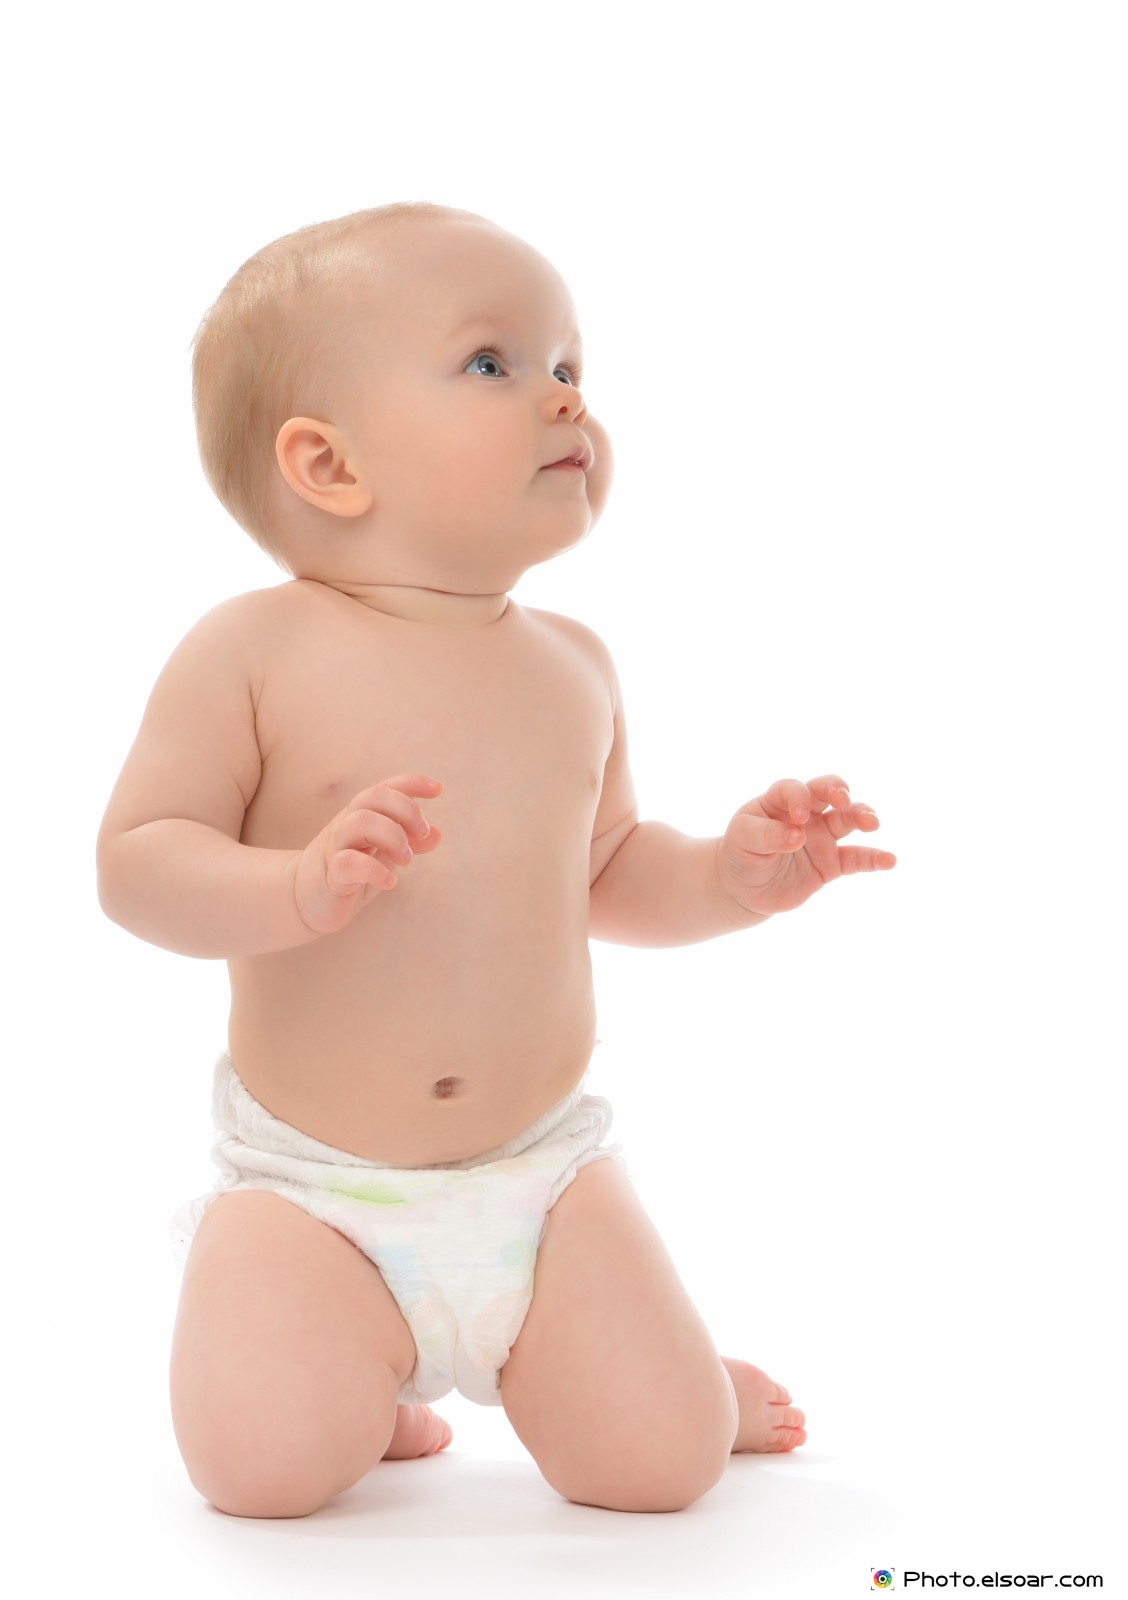 PNG HD Baby - 153811